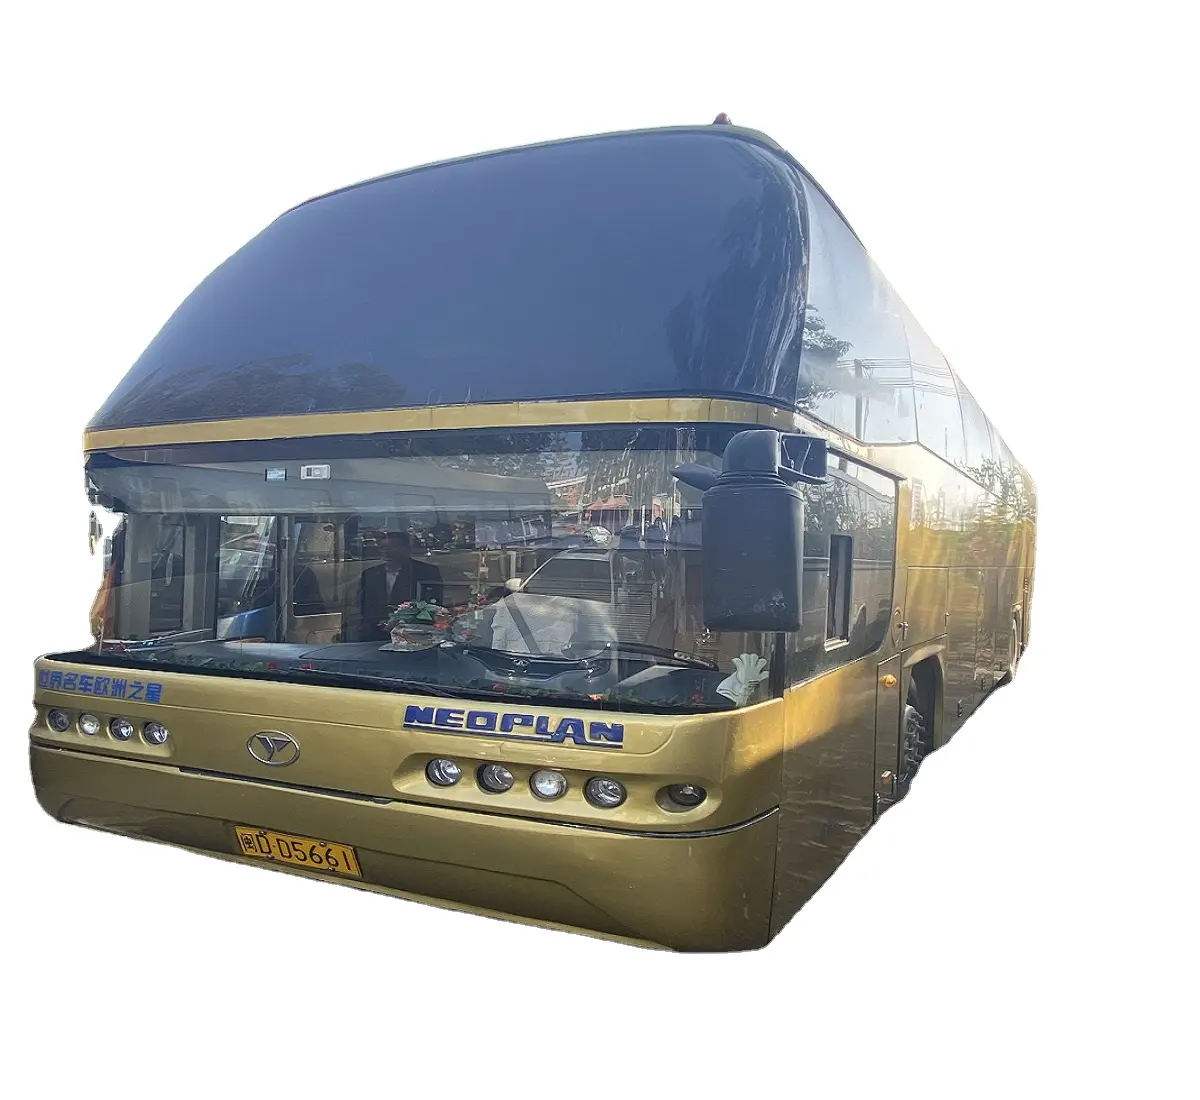 2012 Year Neoplan Bus 47 Seats BFC6127HS Bus for export sale